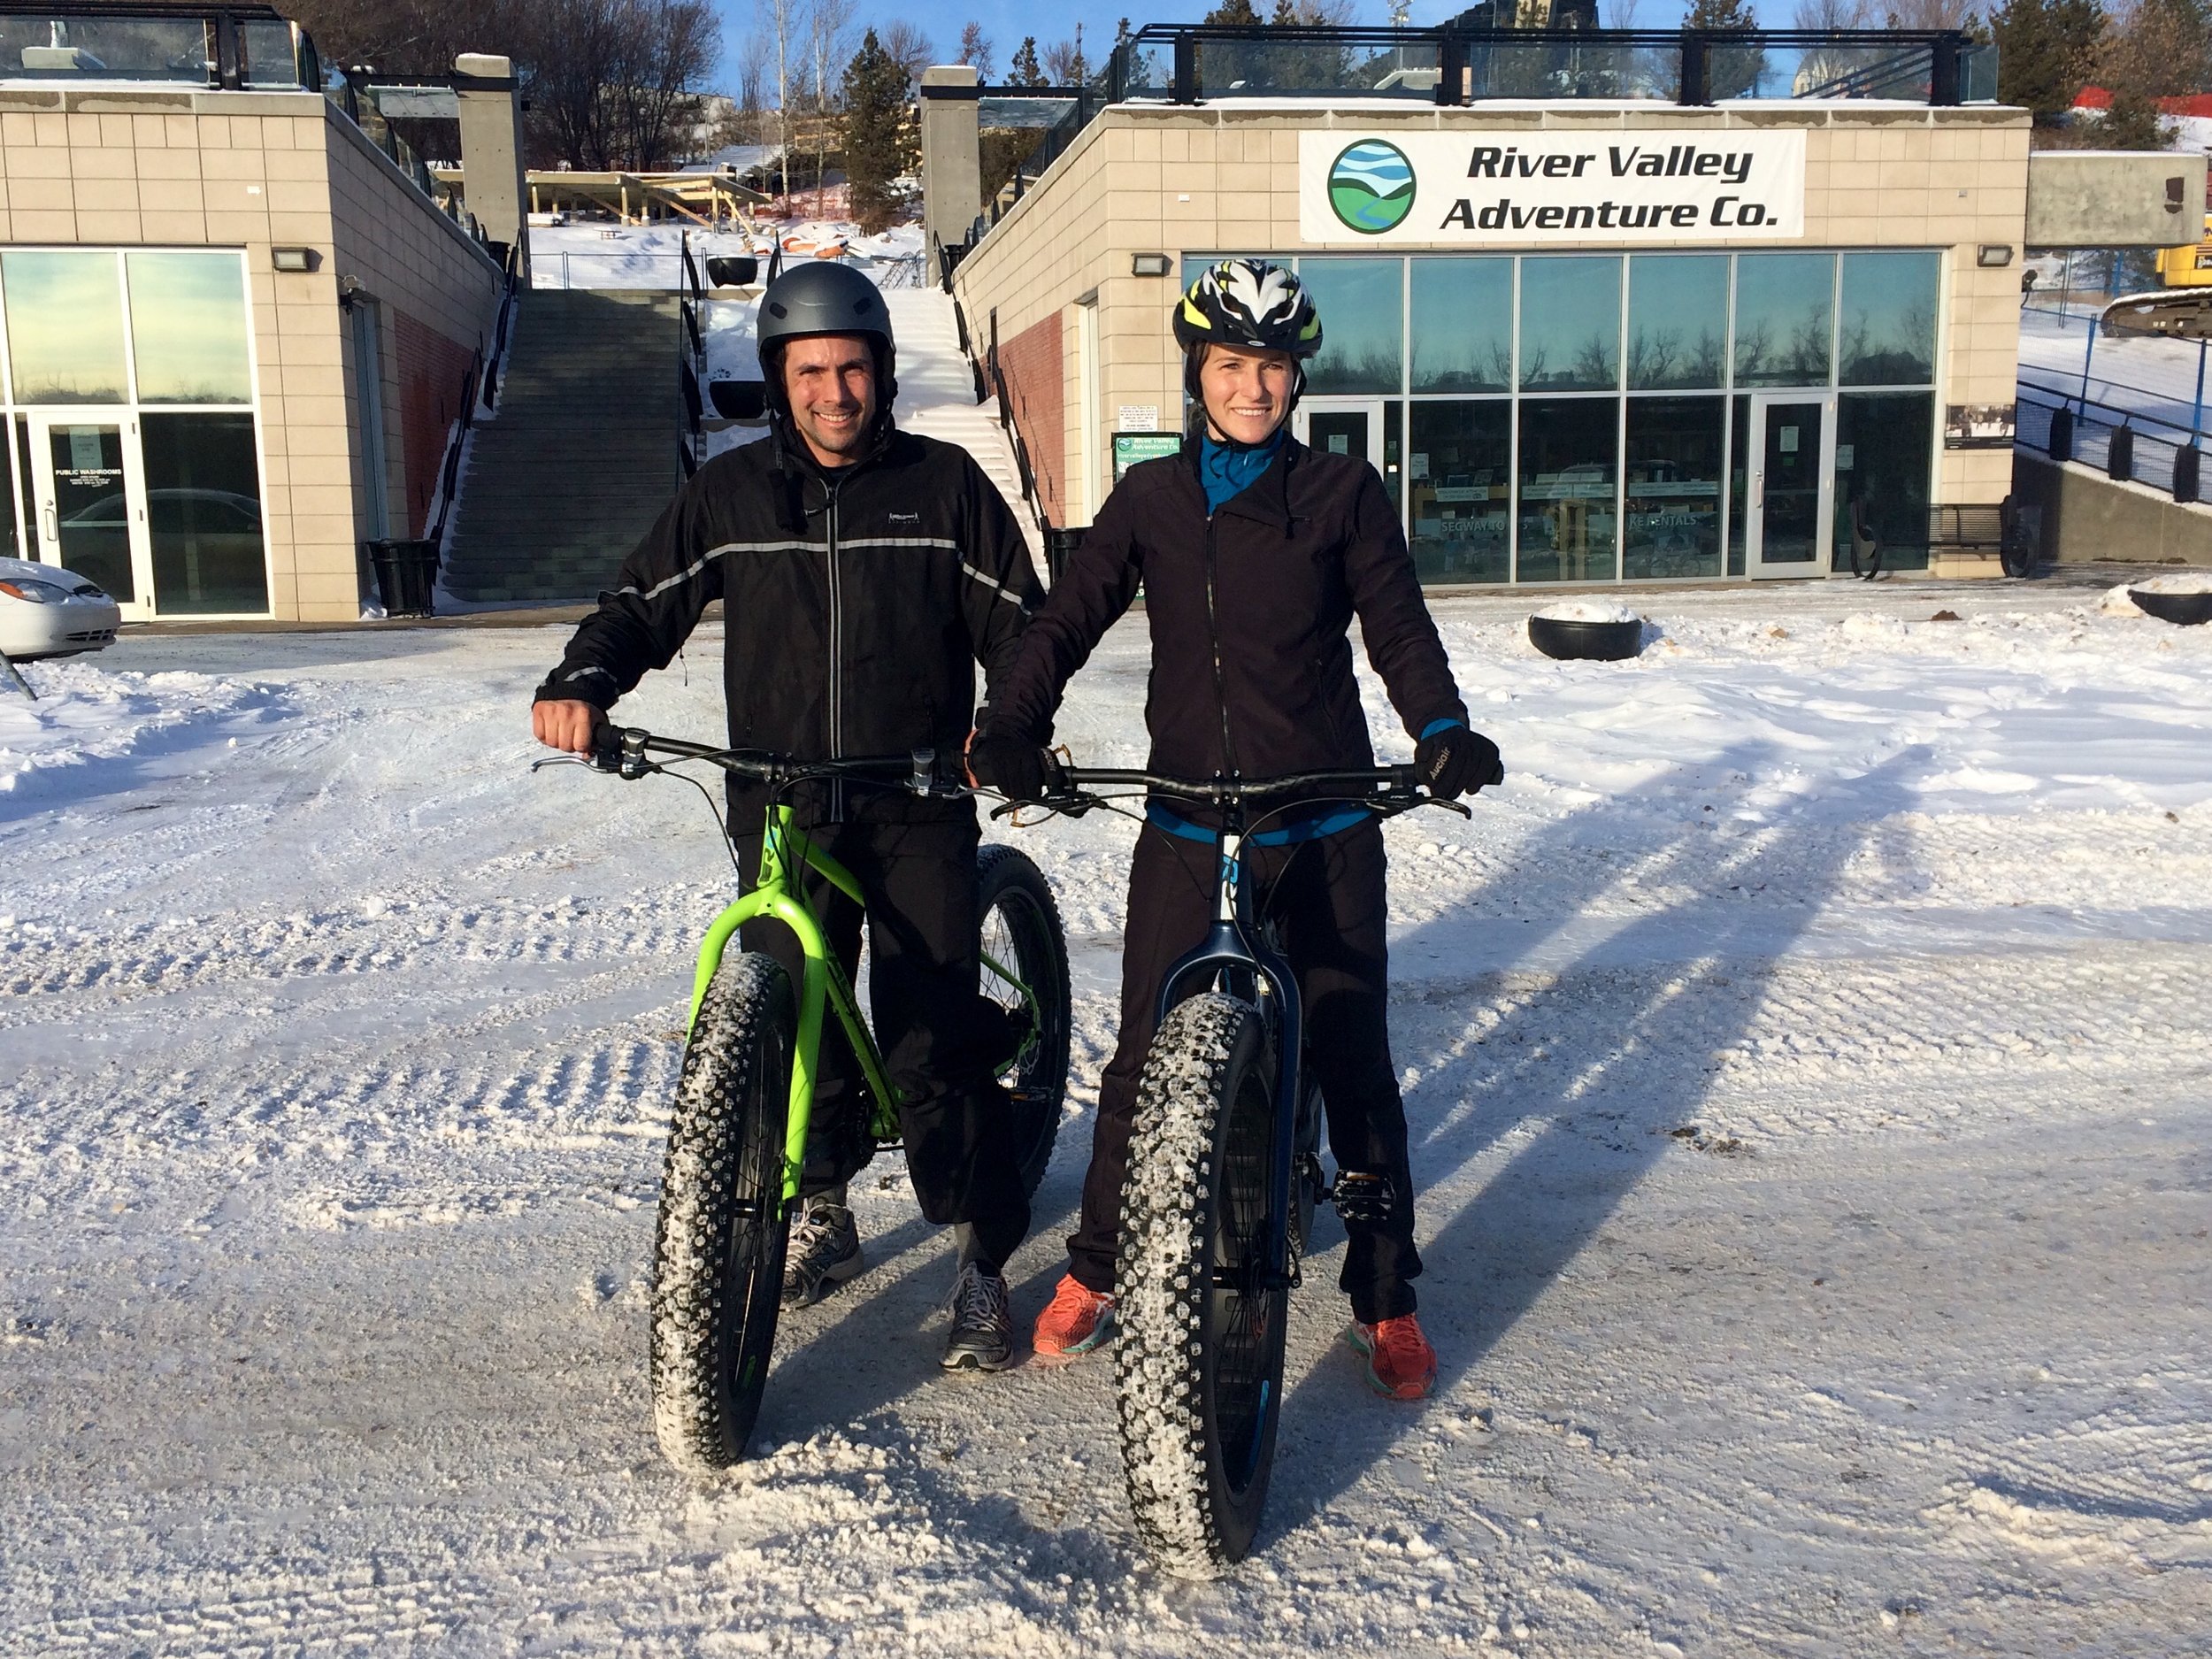 Fat bike Rentals and Tours